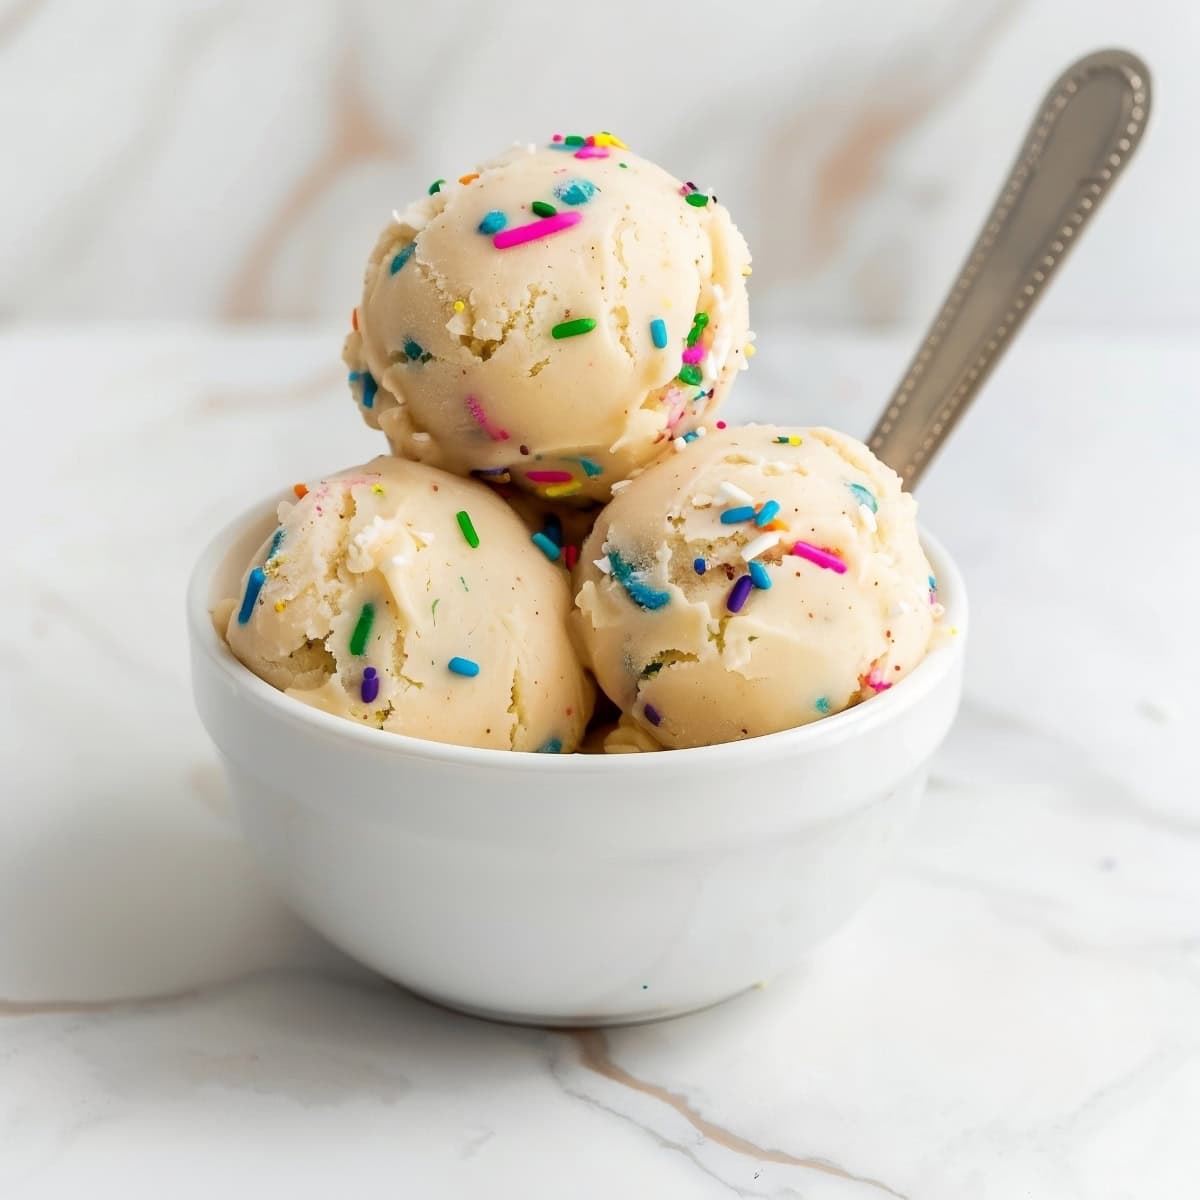 Homemade edible sugar cookie dough, featuring a rich, creamy consistency and colorful confetti sprinkles.